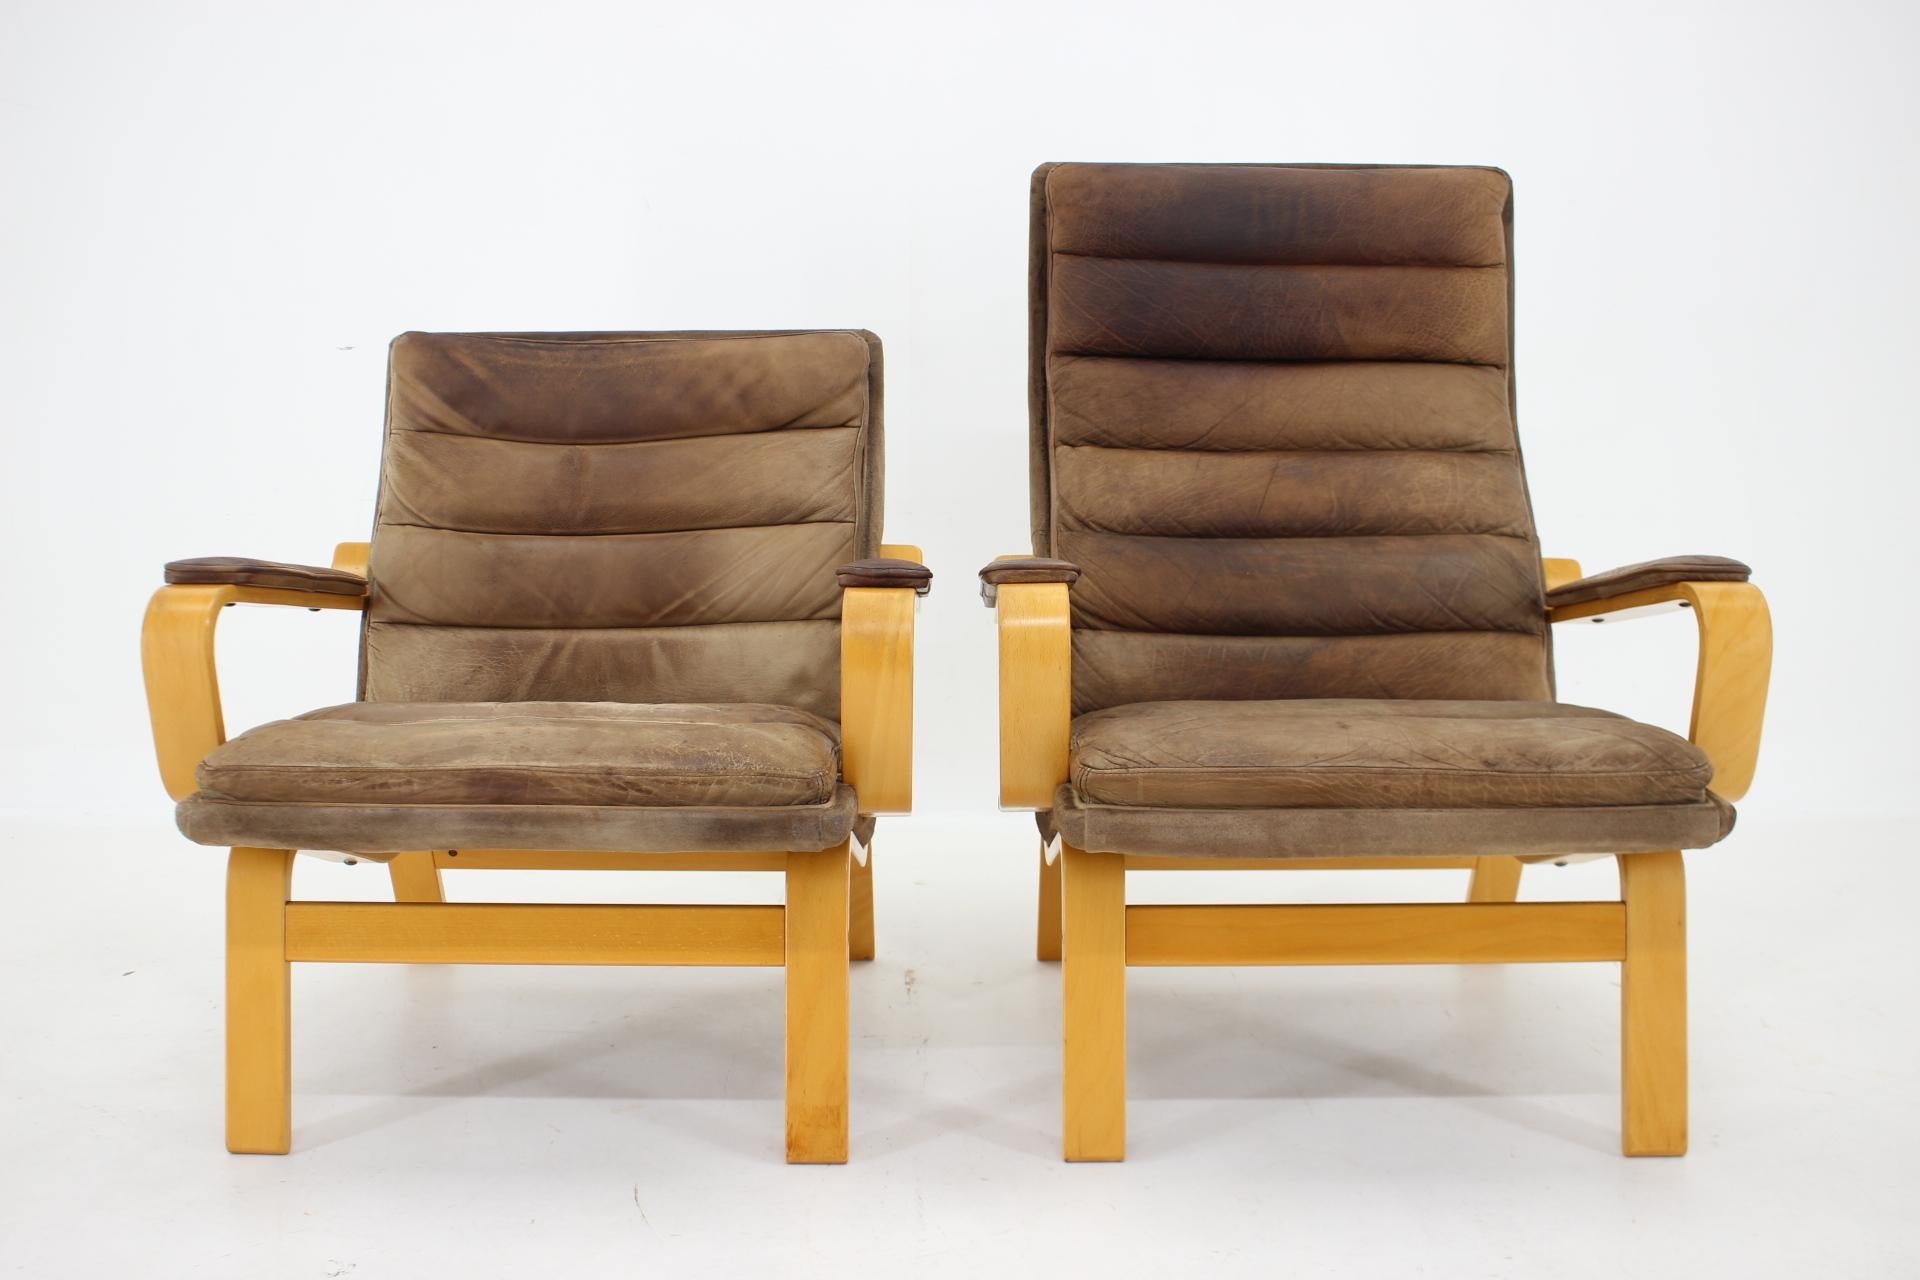 - good original condition 
- sturdy and stable 
- Patinated leather in good condition
- dimensions : 77 (40) 74 70, 99 (40) 74 80.